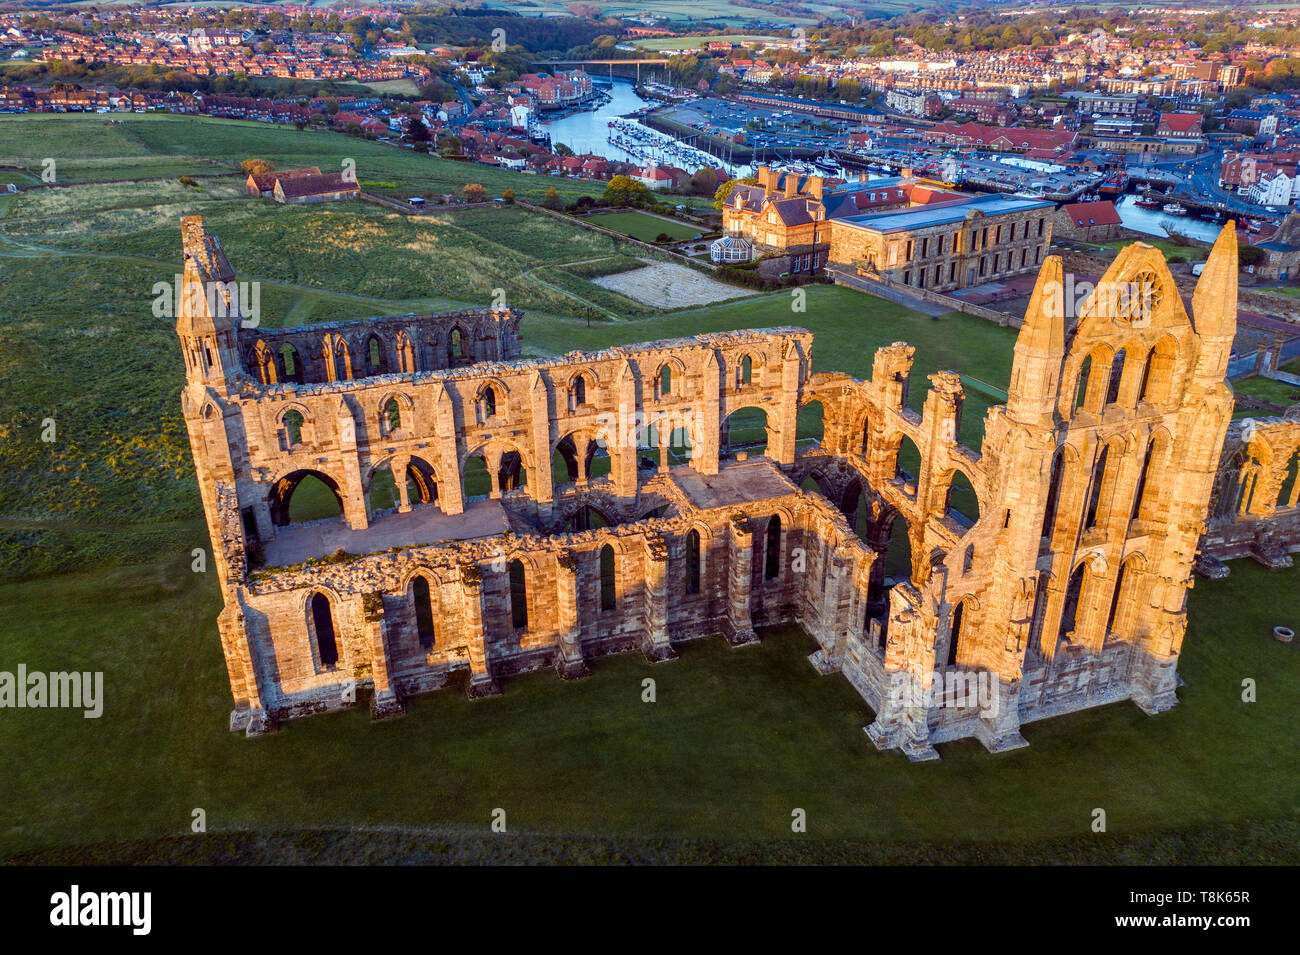 Whitby Abbey at Dawn, mai North Yorkshire, England, UK Banque D'Images